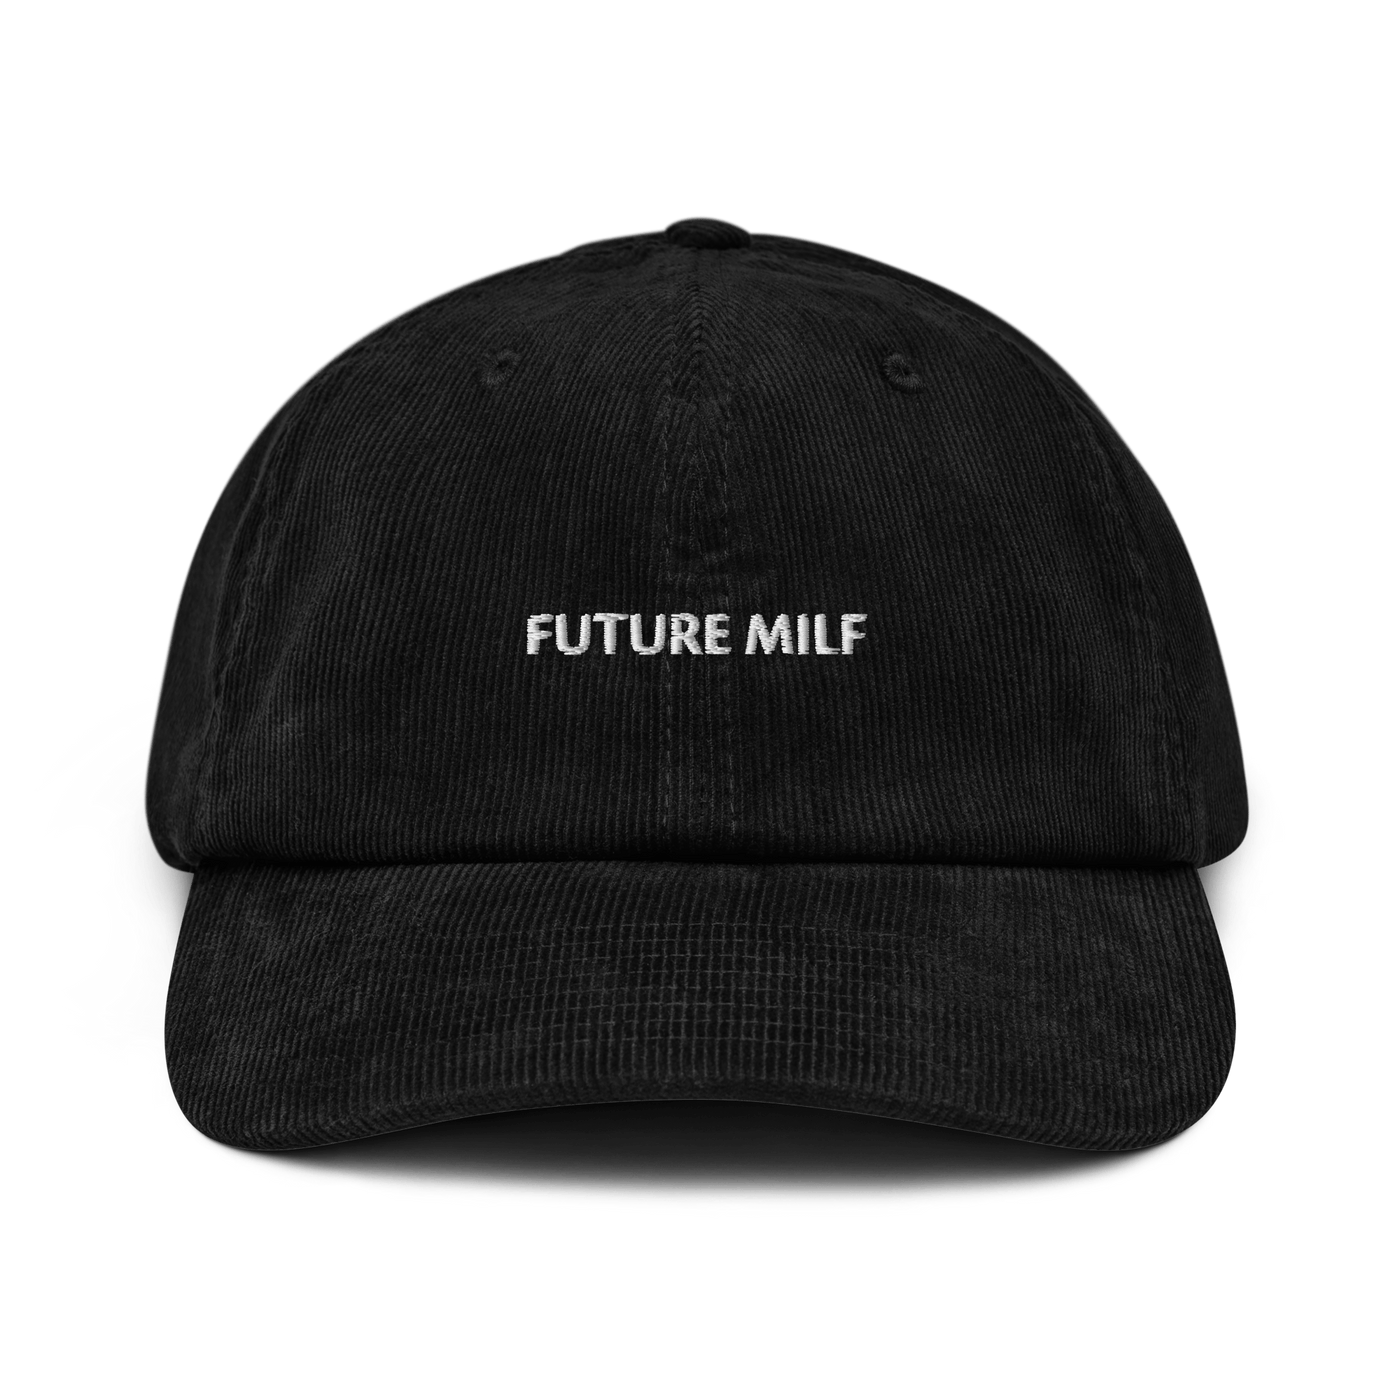 Future Milf Corduroy hat - Black - - Just Another Cap Store